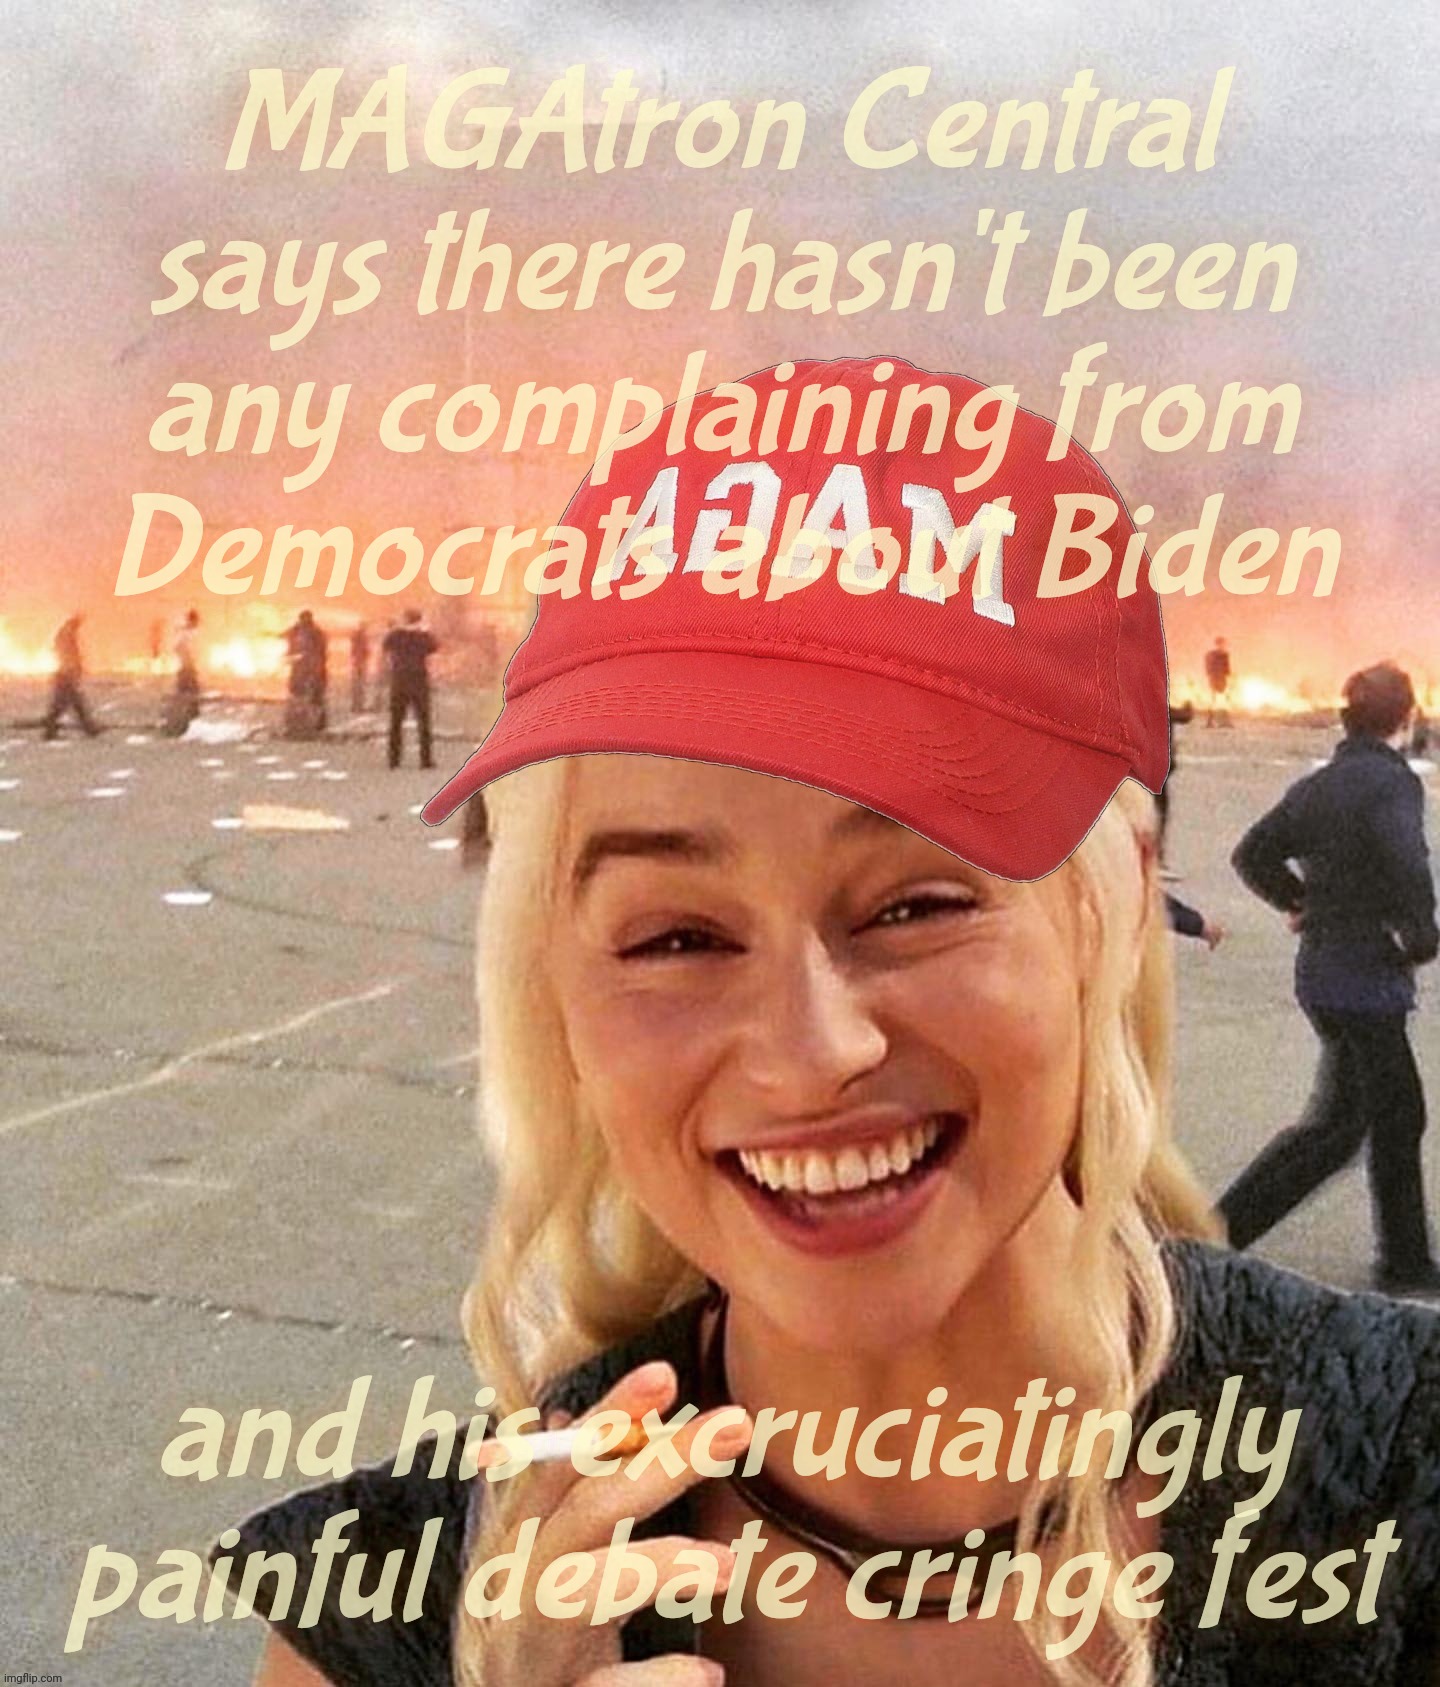 The ding is gone, but not yet forgotten. This is the story of a postule gone rotten. | MAGAtron Central says there hasn't been any complaining from
Democrats about Biden and his excruciatingly painful debate cringe fest | image tagged in disaster smoker girl maga edition,joe biden,duh biden,debate 2024,mumble in the bungle,st petersburg magat script | made w/ Imgflip meme maker